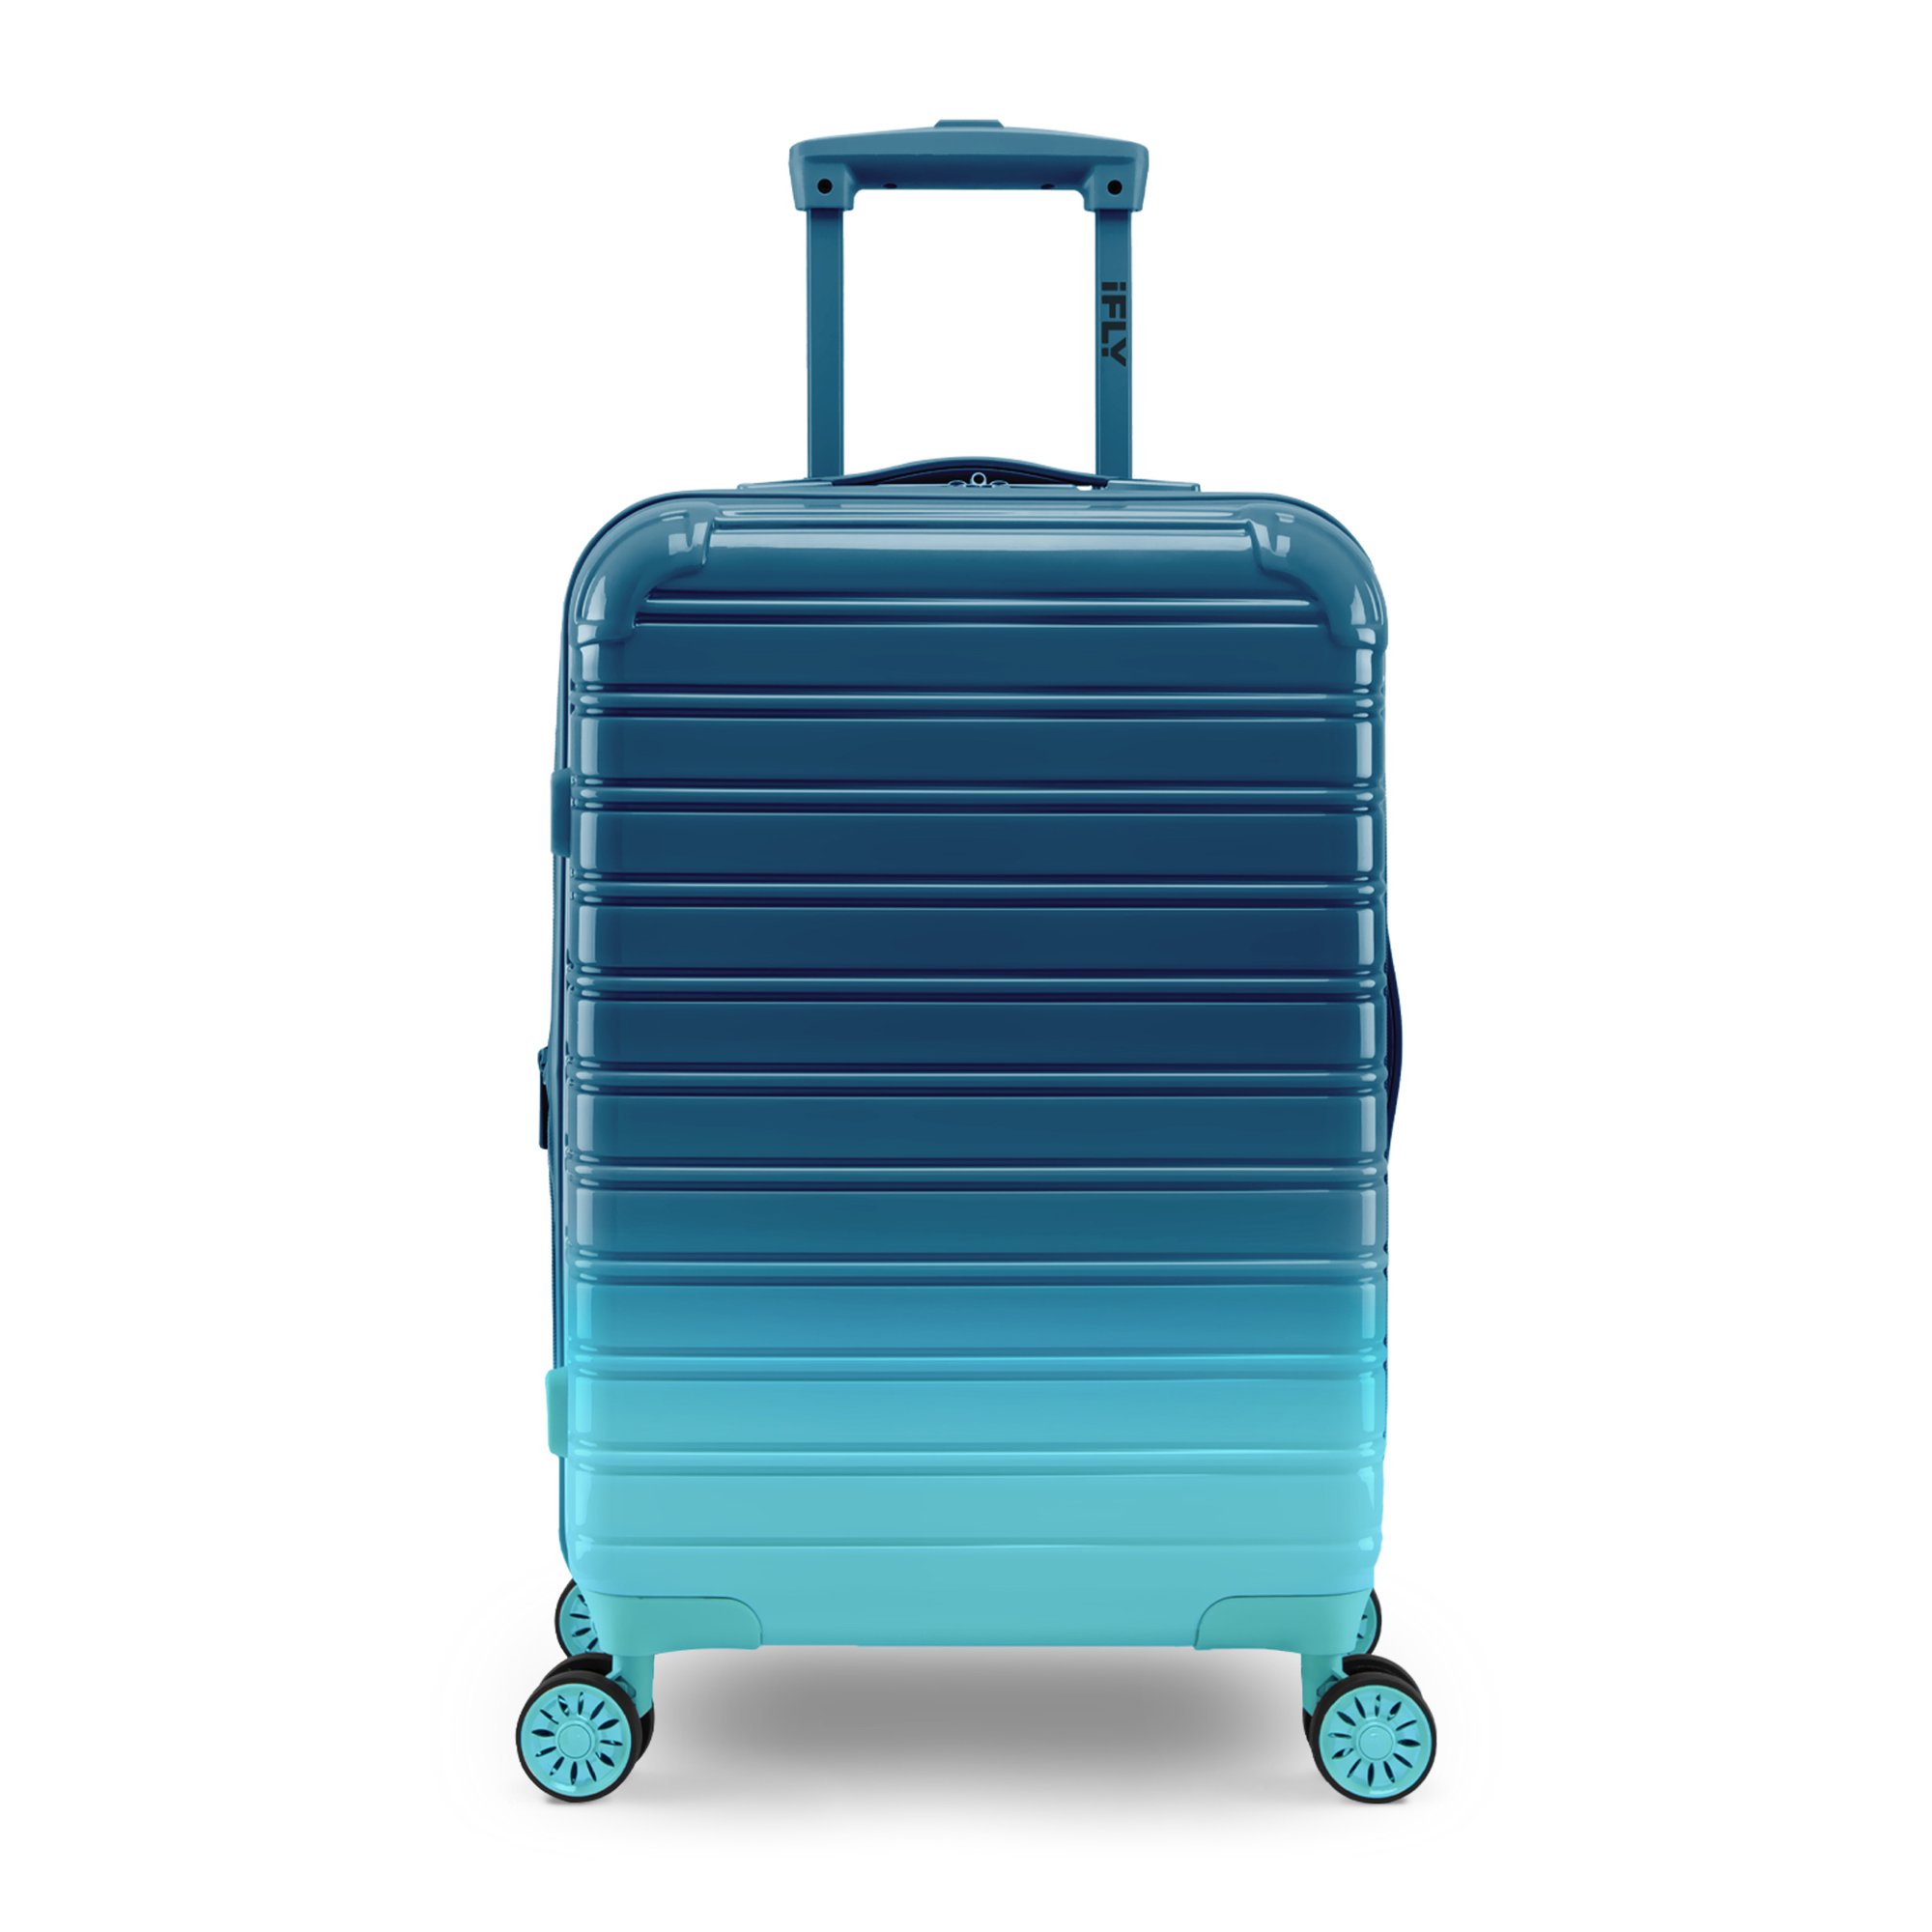 iFLY Hardside Fibertech Carry-on Luggage - Only $41.00